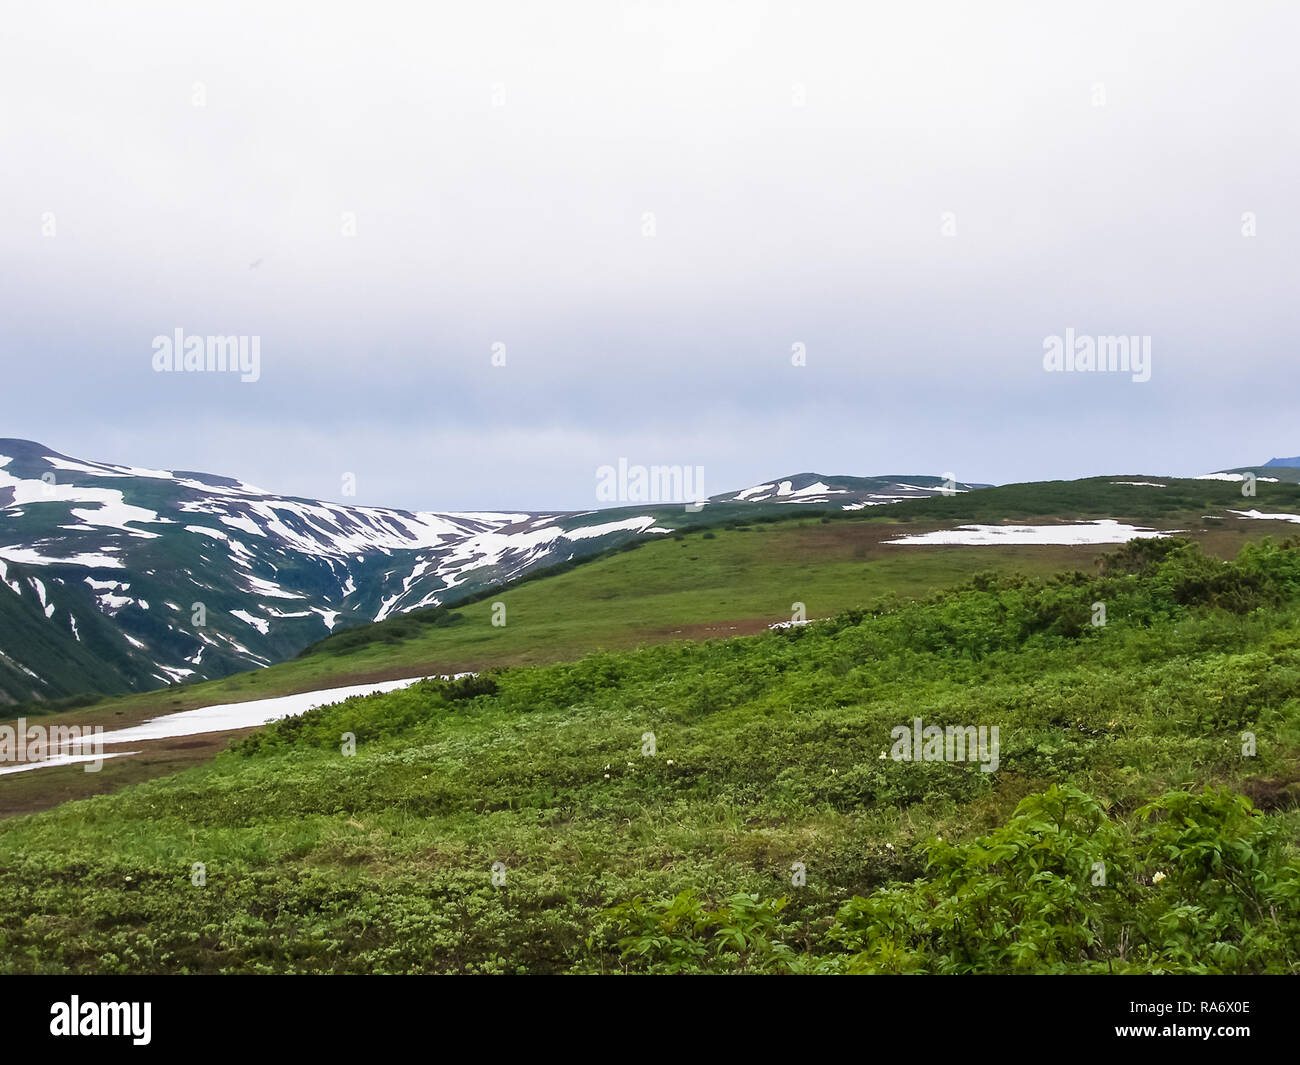 Nature of Kamchatka. Landscapes and magnificent views of the Kamchatka Peninsula. Stock Photo